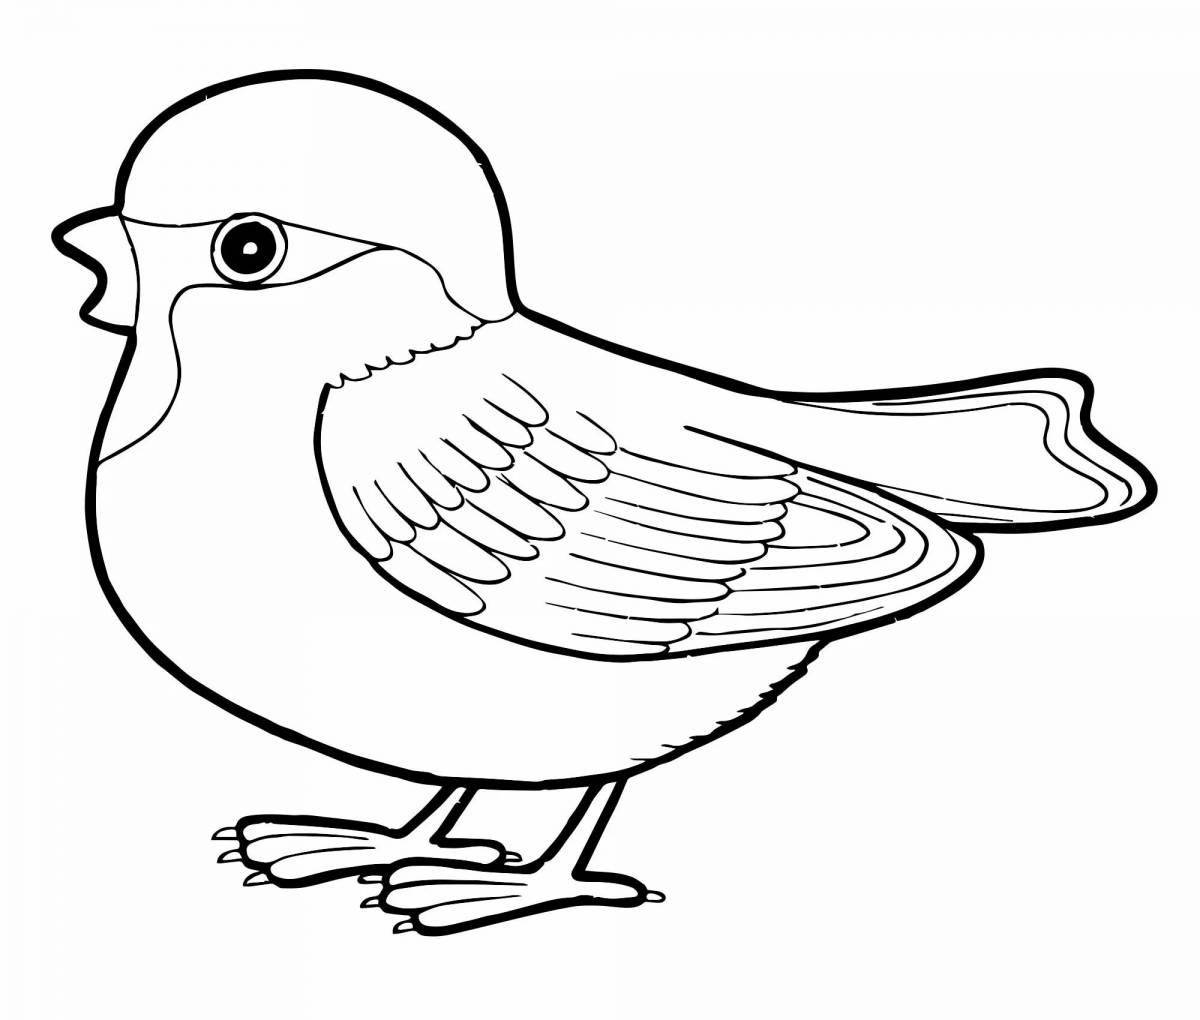 Playful tit coloring book for 2-3 year olds